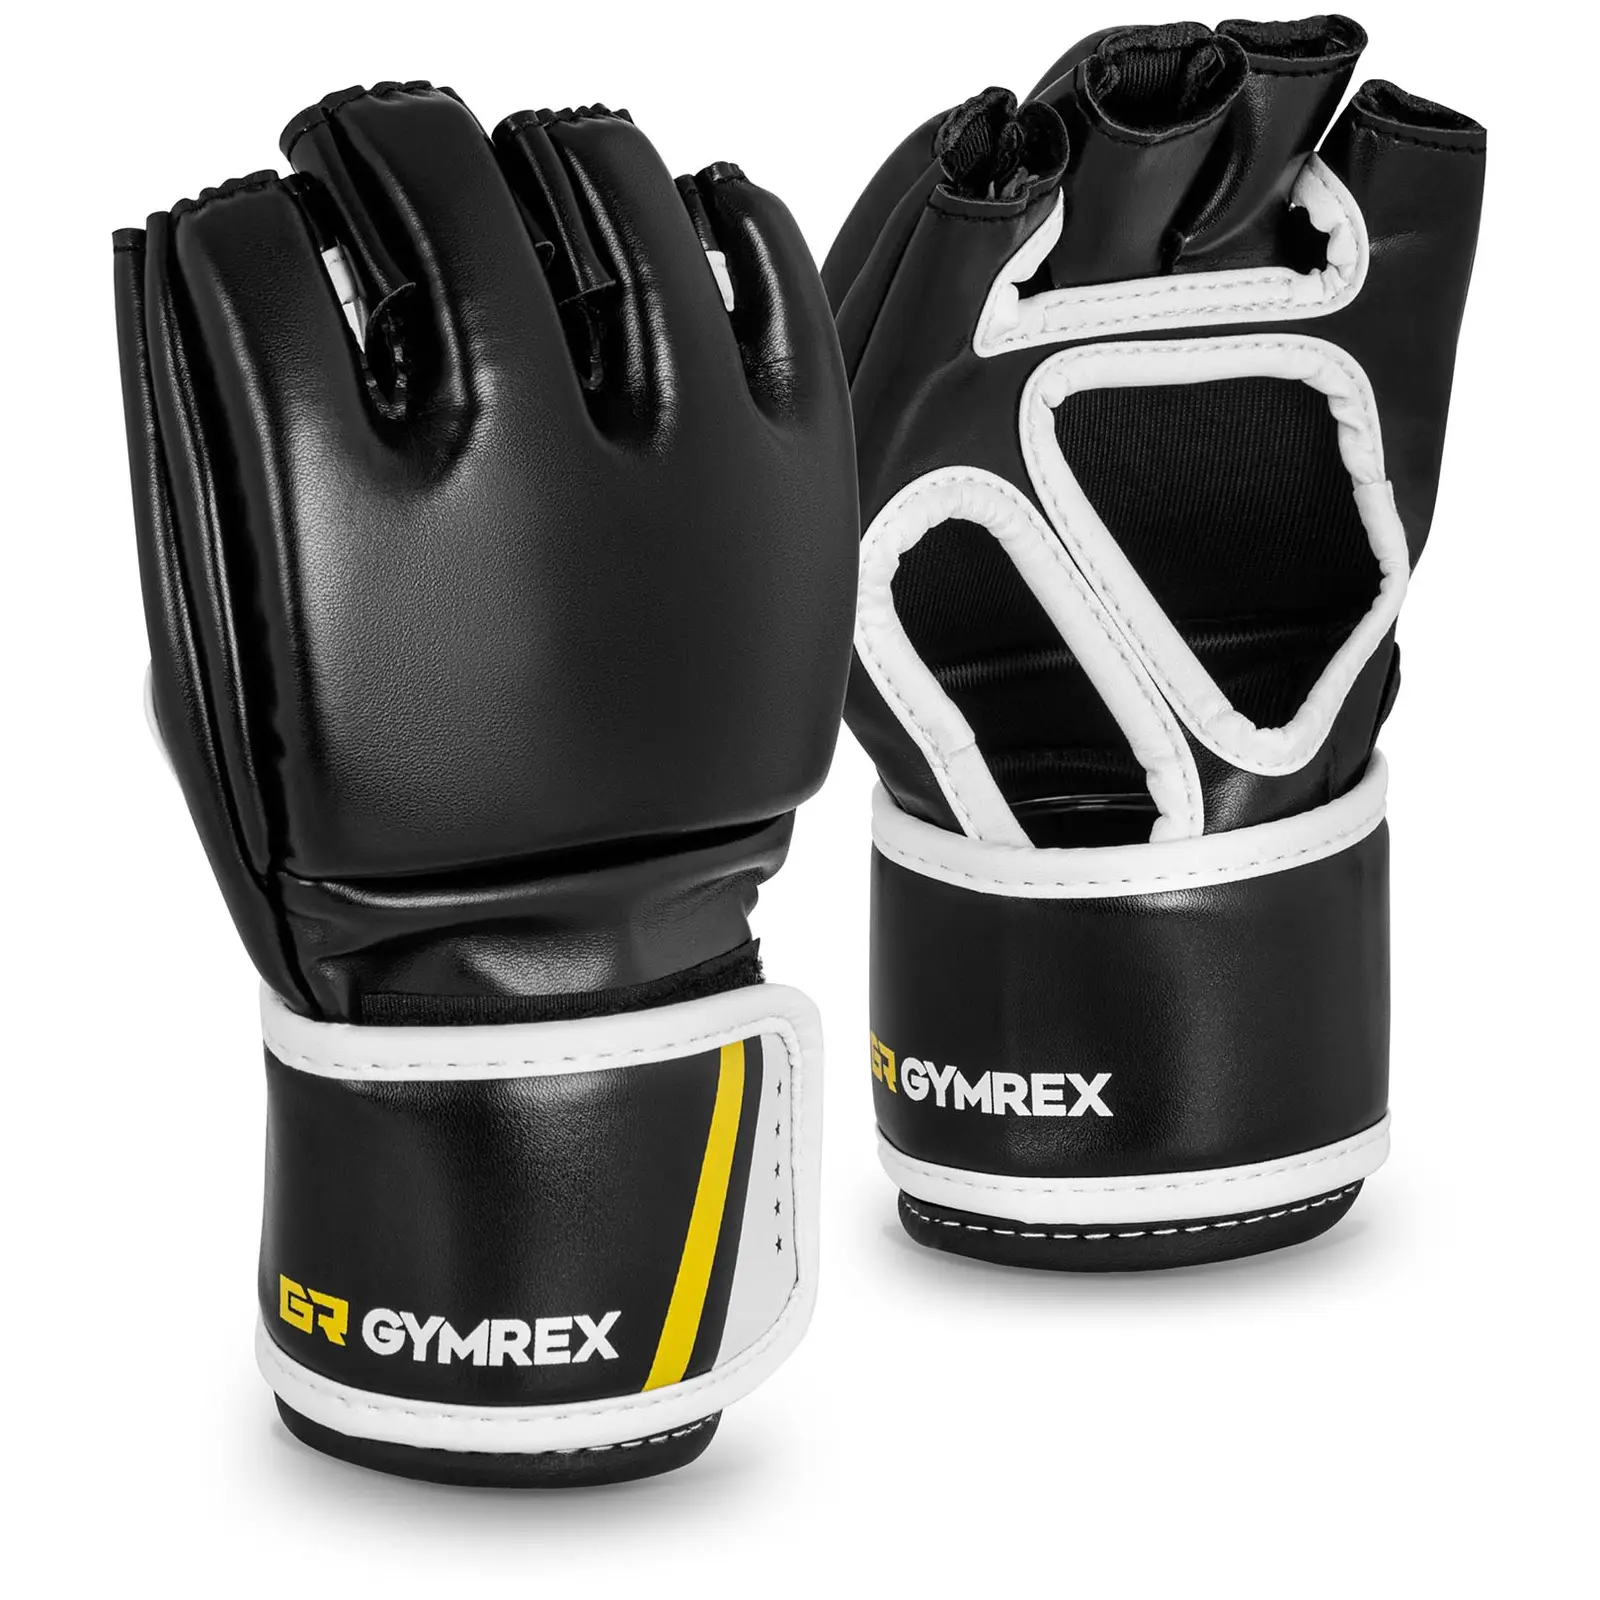 MMA Gloves - size L/XL - black - without thumbs